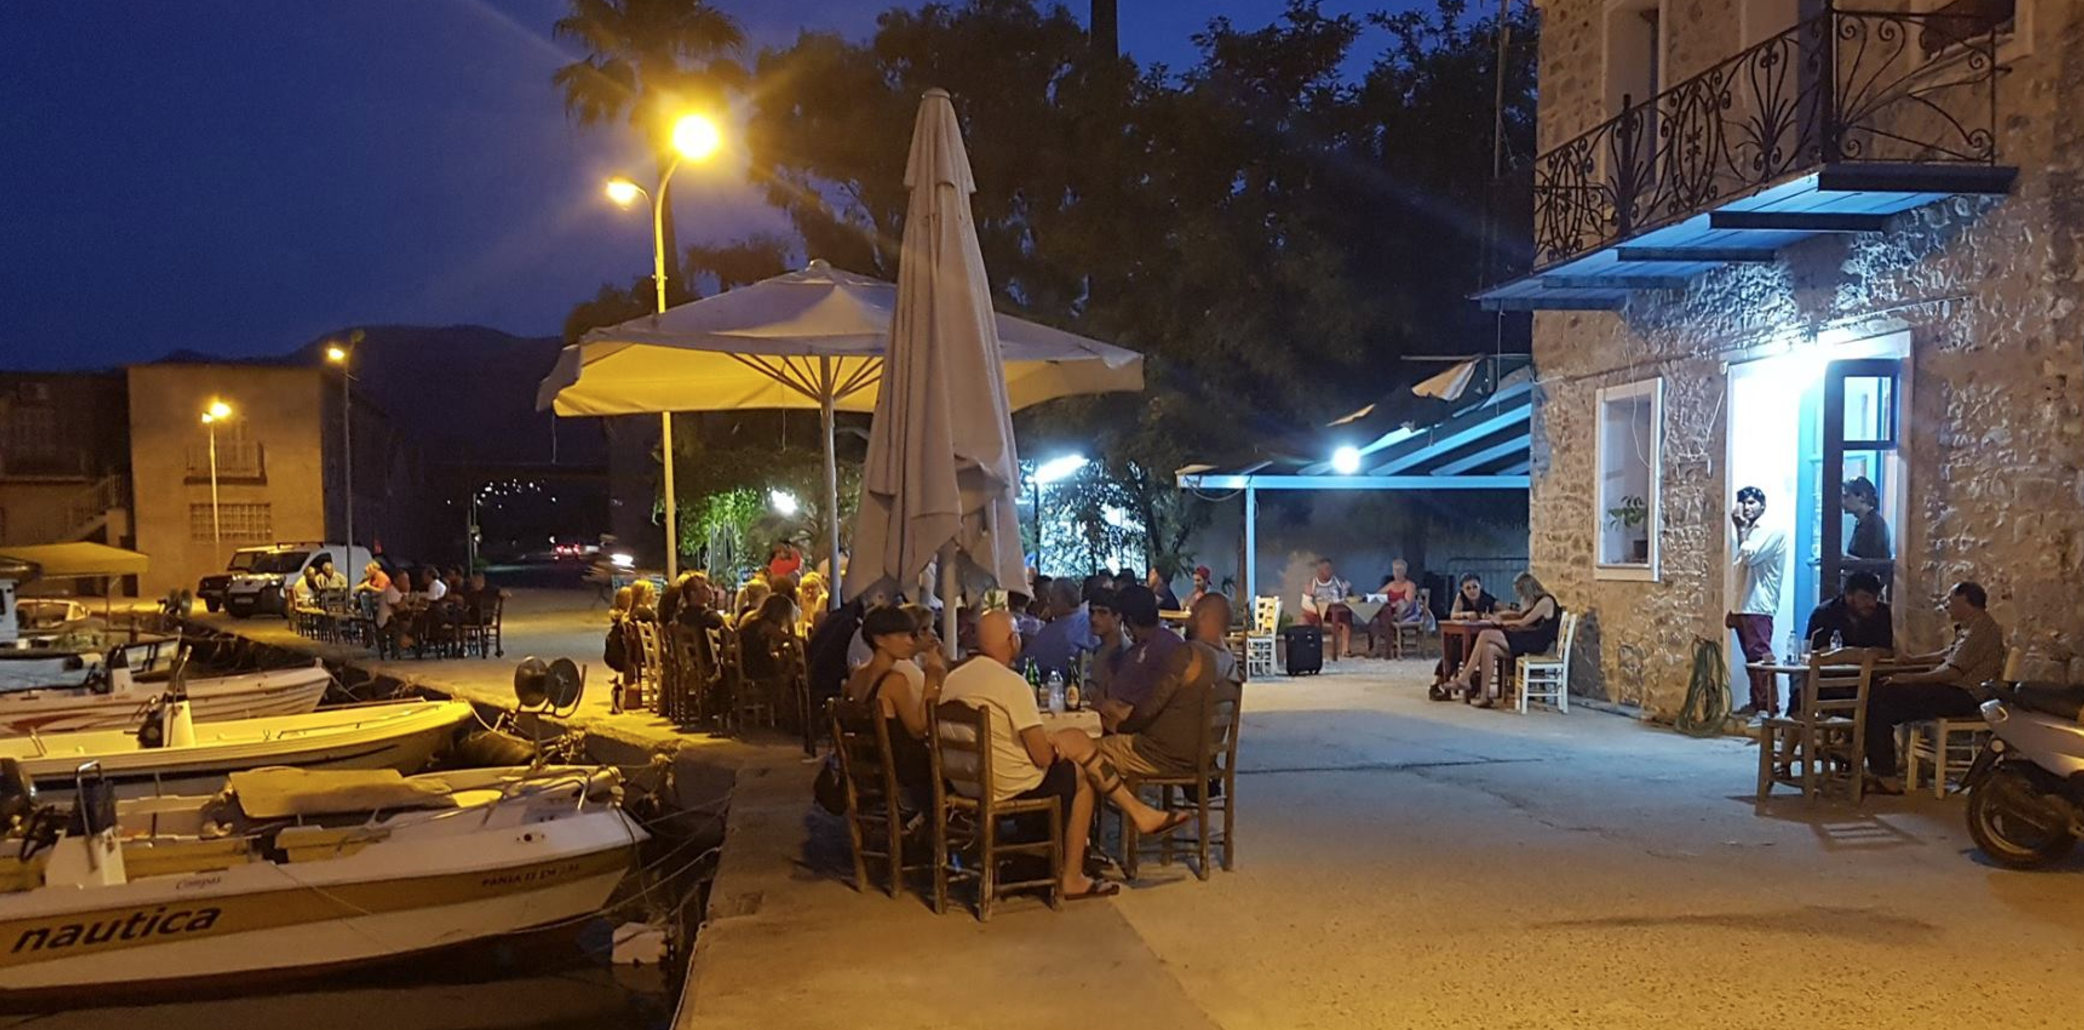 It bothered Nikos and Katherina to see people eating on the ground as if they were subhuman. This was not a something the couple wanted to be a part of. Instead, they began taking the refugees out of the camps to eat with them as guests in their restaurant, family style.